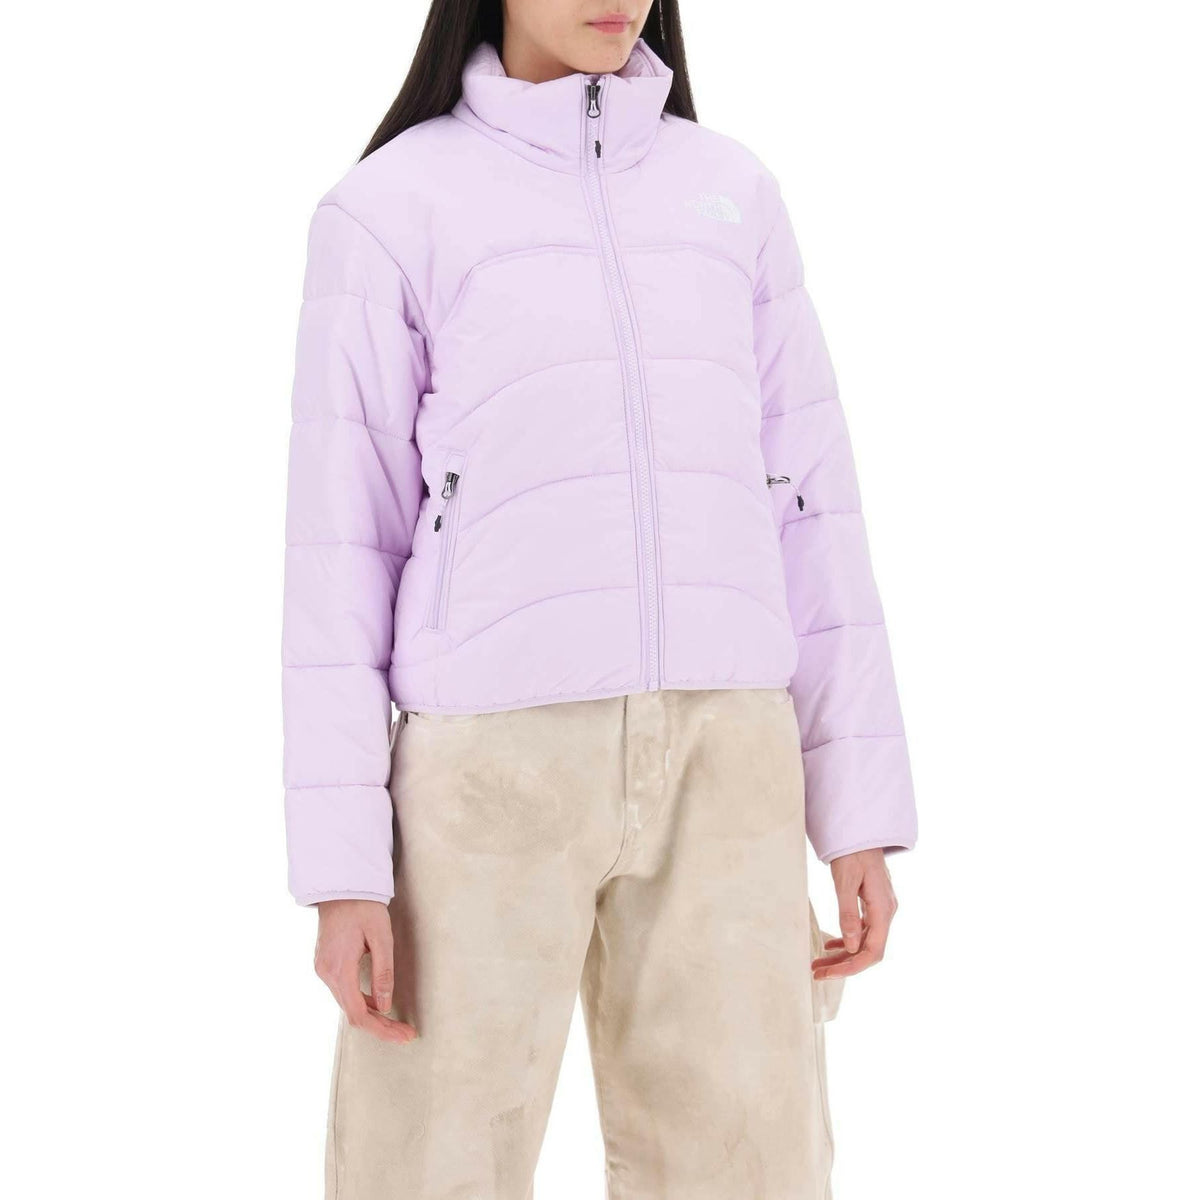 THE NORTH FACE - The North Face 'Elements' Short Puffer Jacket - JOHN JULIA